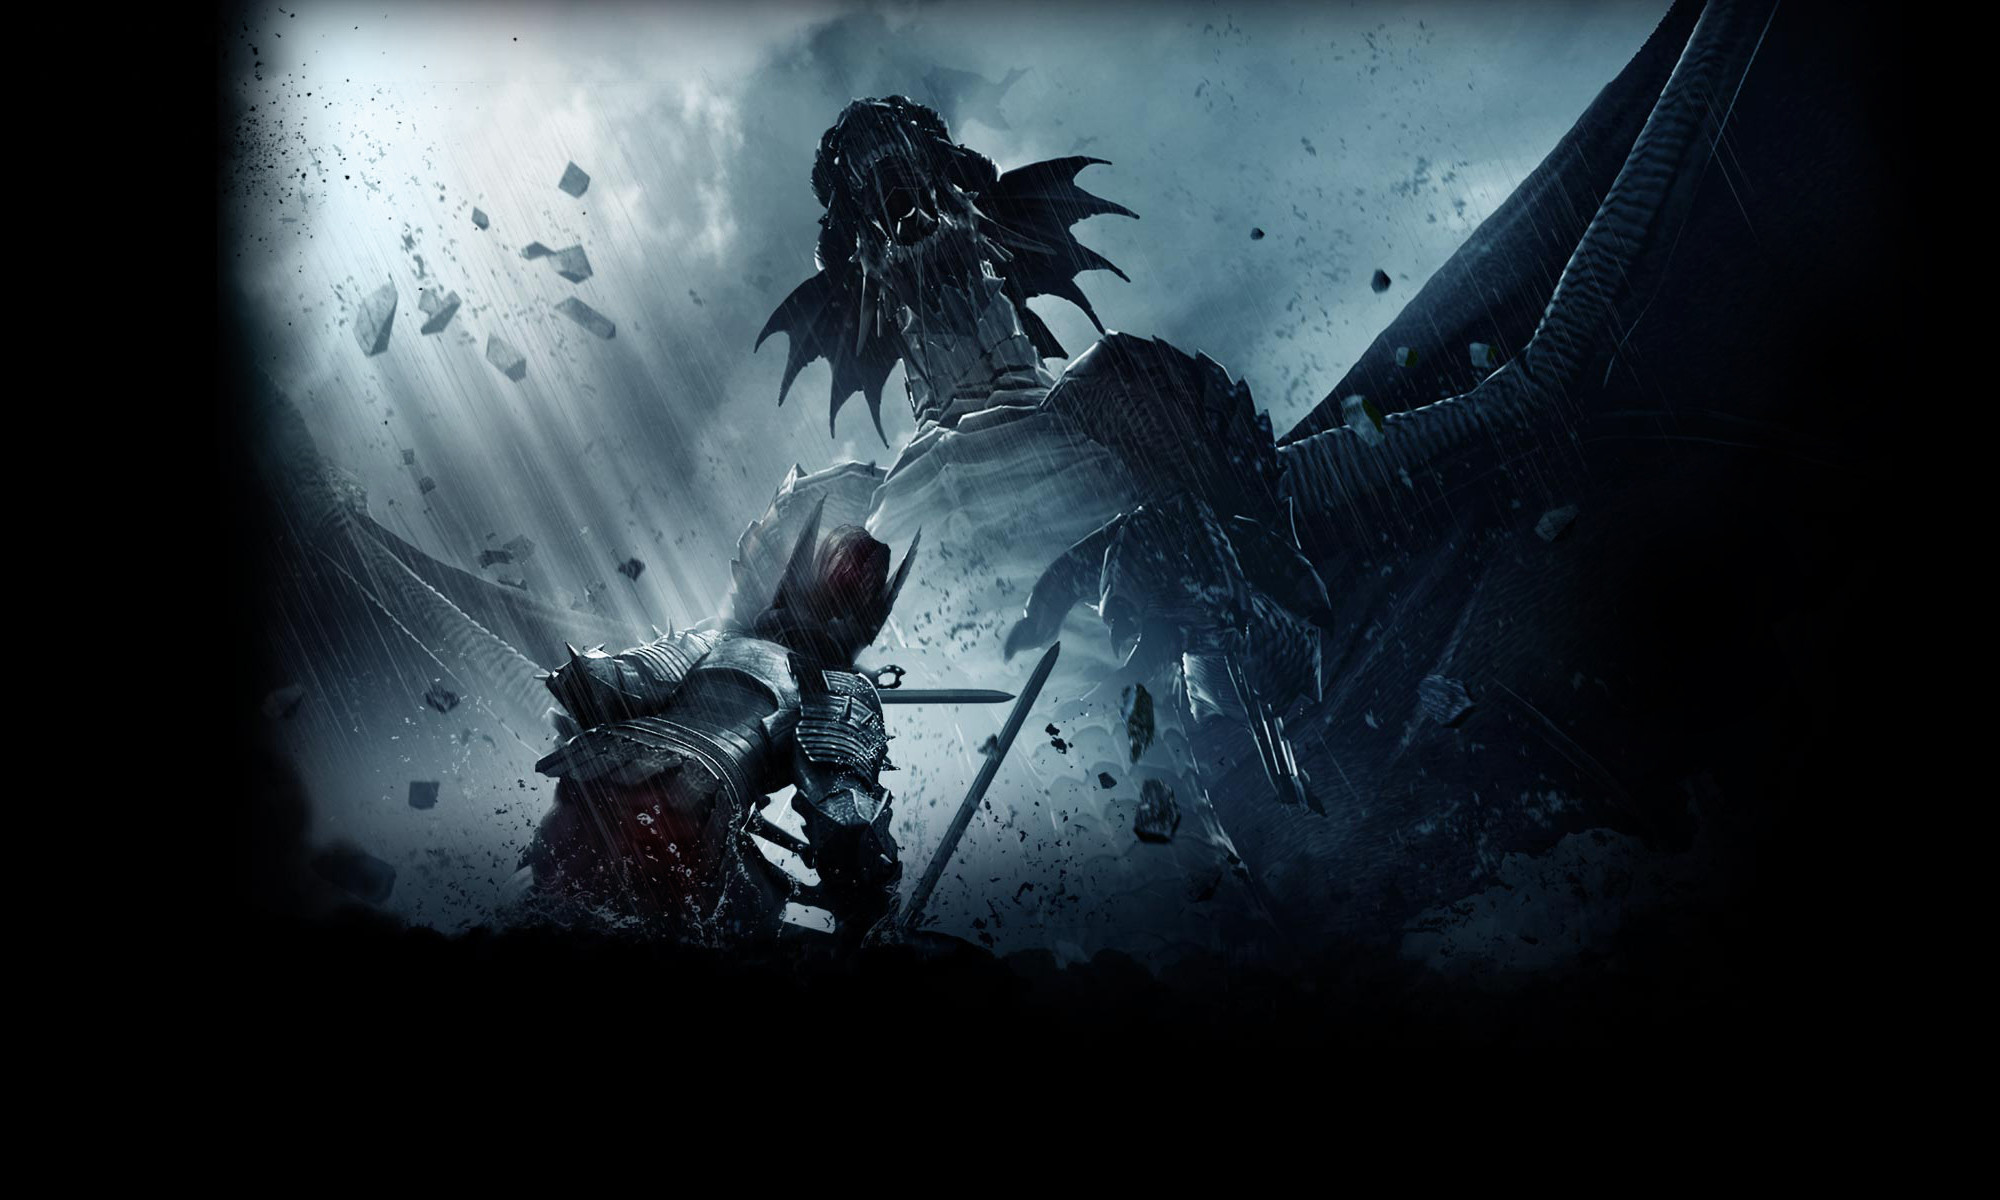 2000x1200 Some new Vindictus wallpapers. Taken from the NA website landing page  (which is very nice btw).